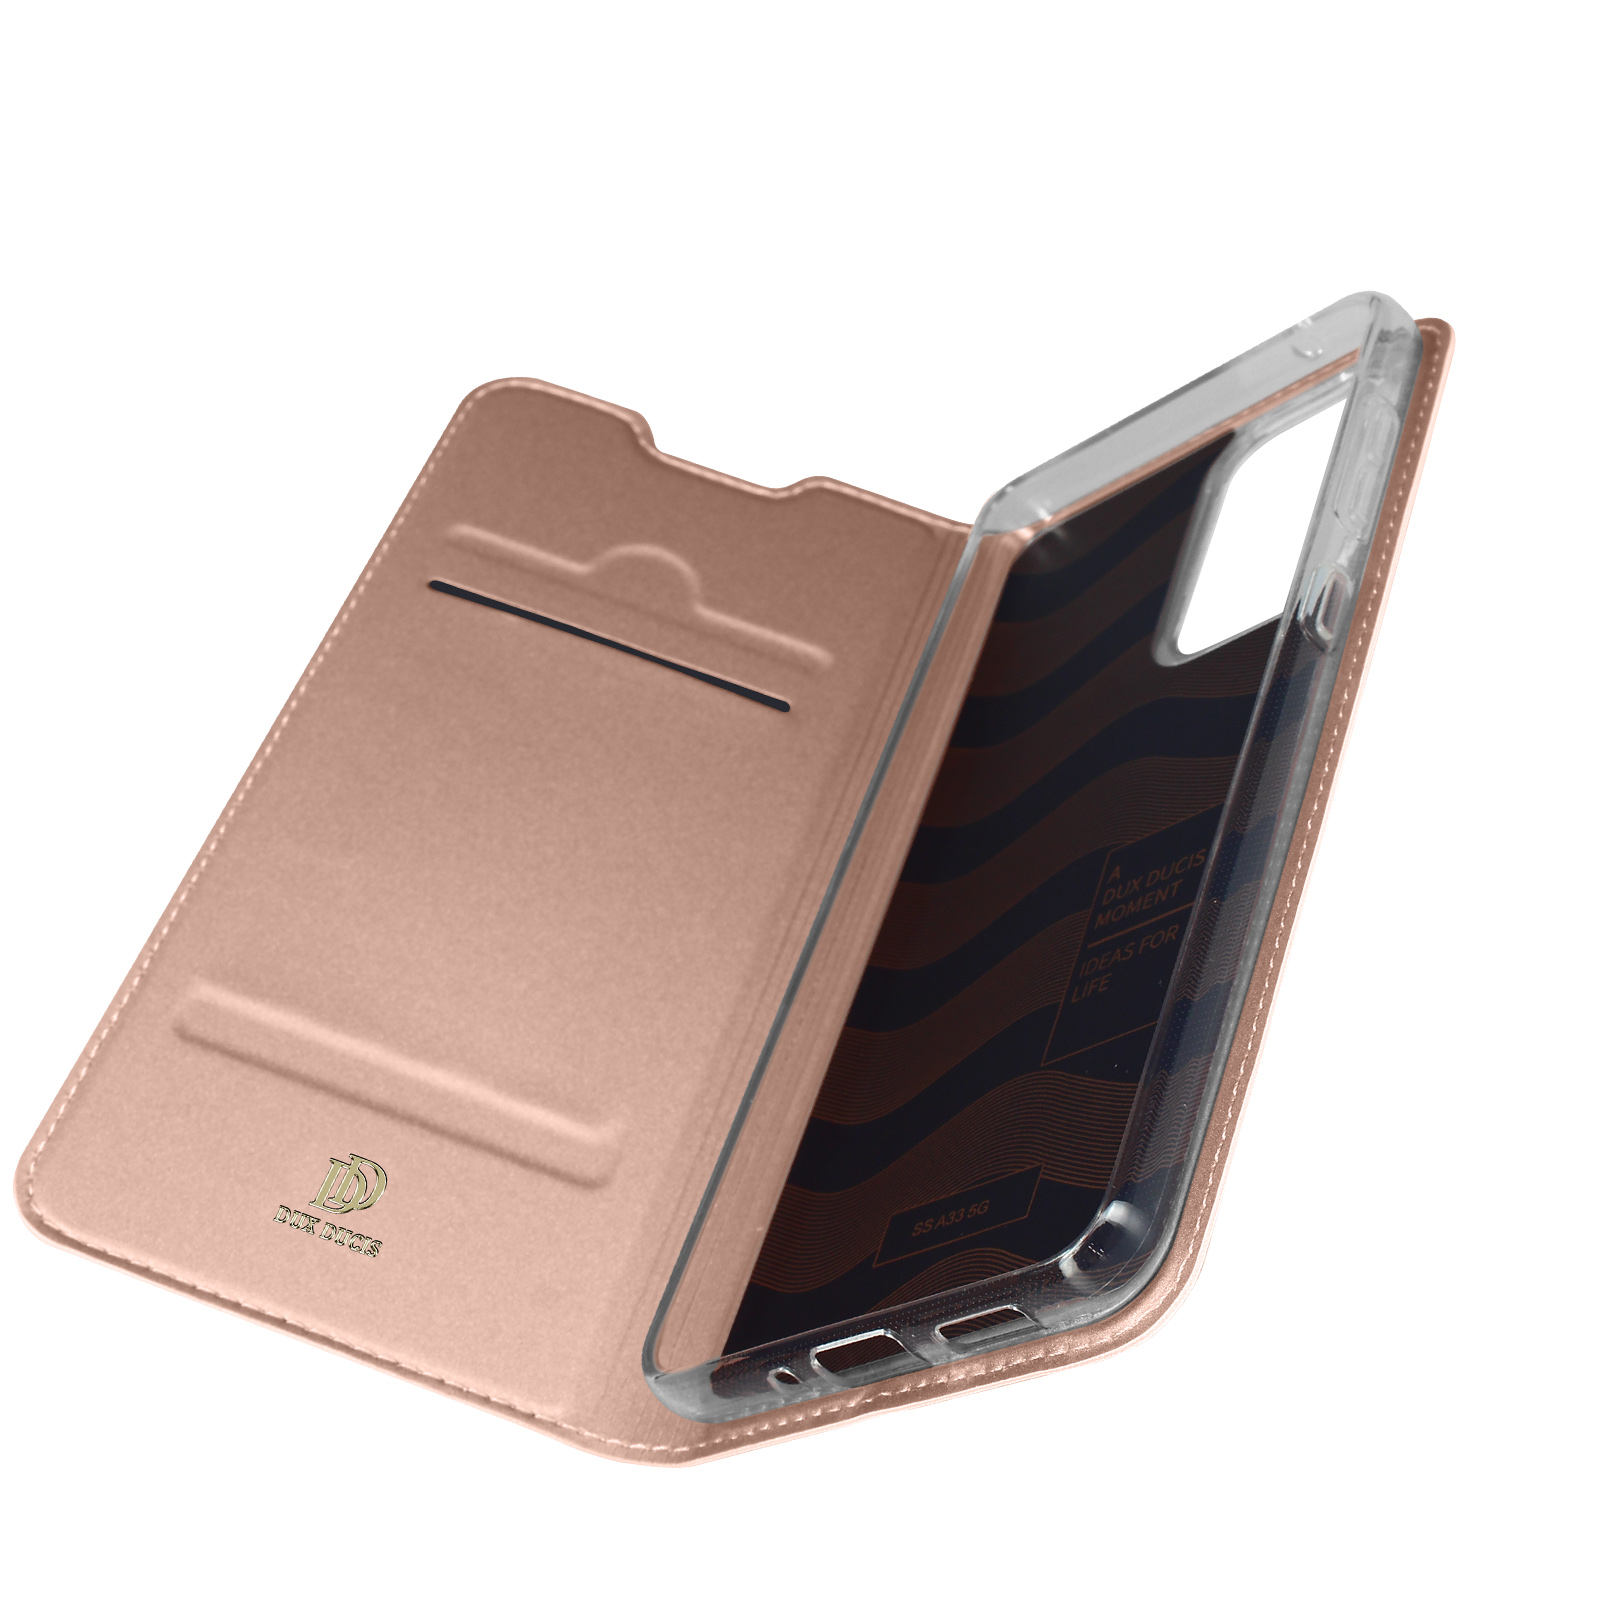 A33 DUX Bookcover, Rosegold DUCIS Pro Series, Galaxy Samsung, 5G,